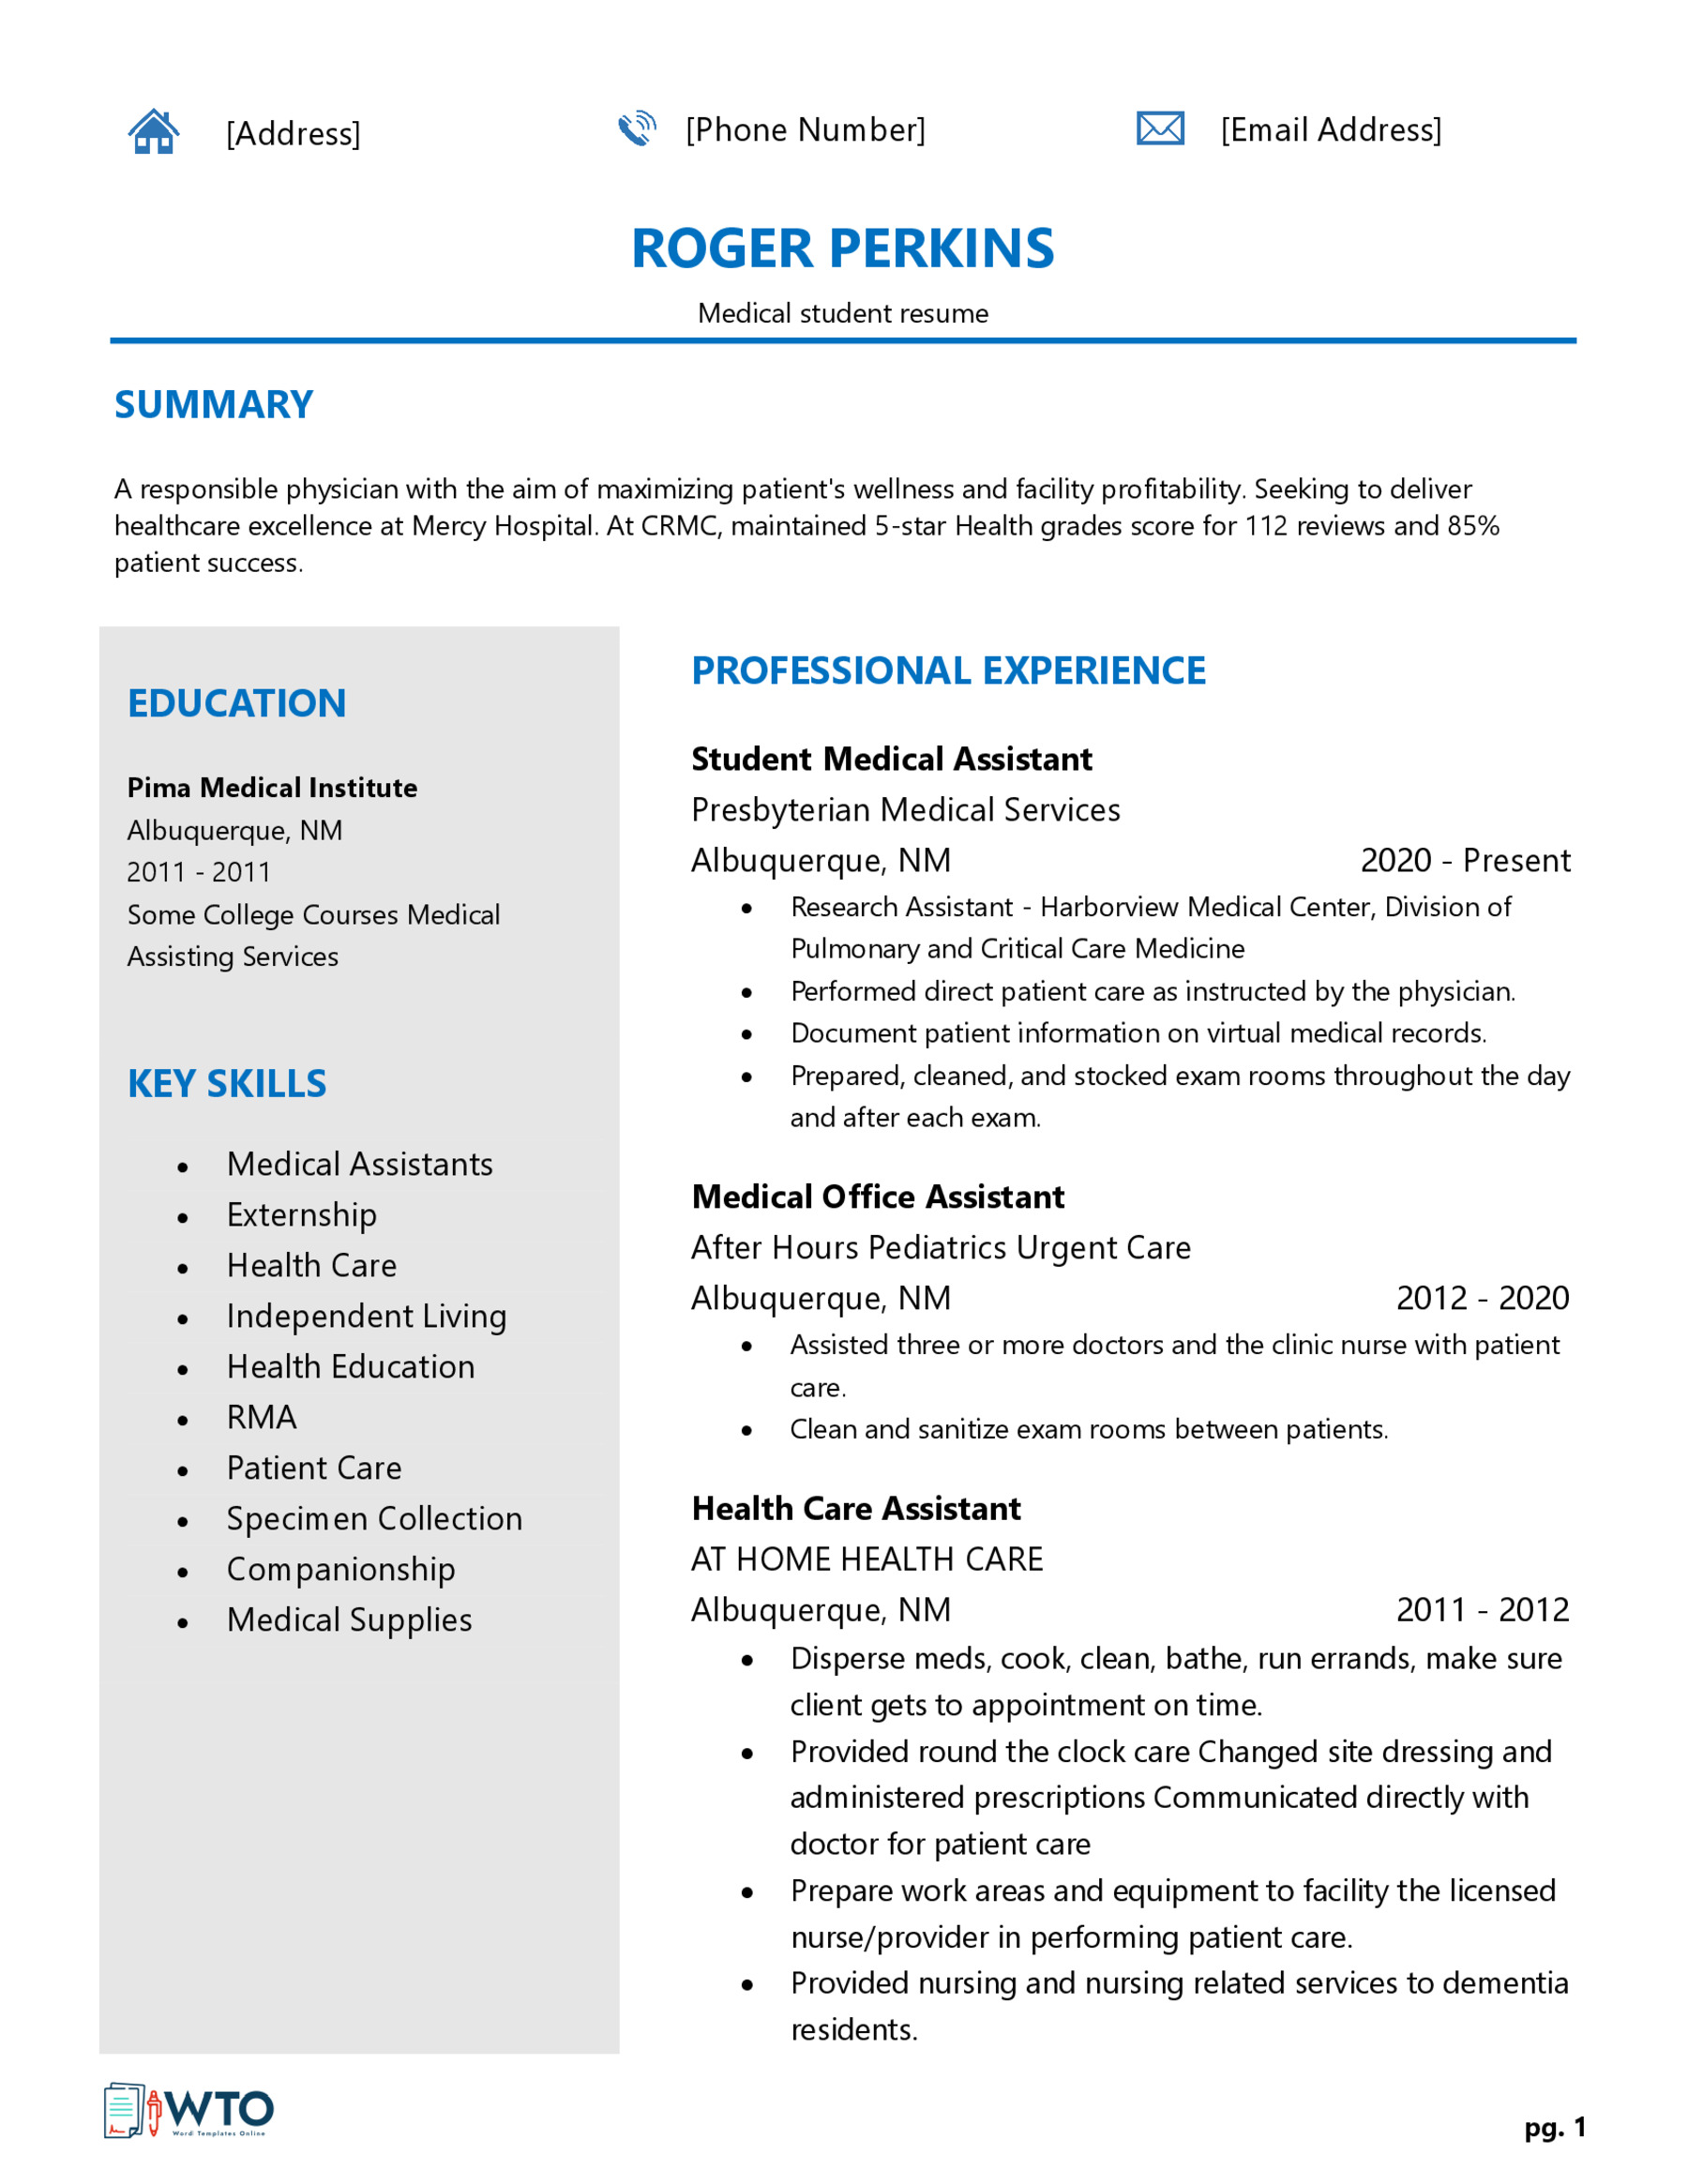 Medical Students Resume Example - Professional Sample